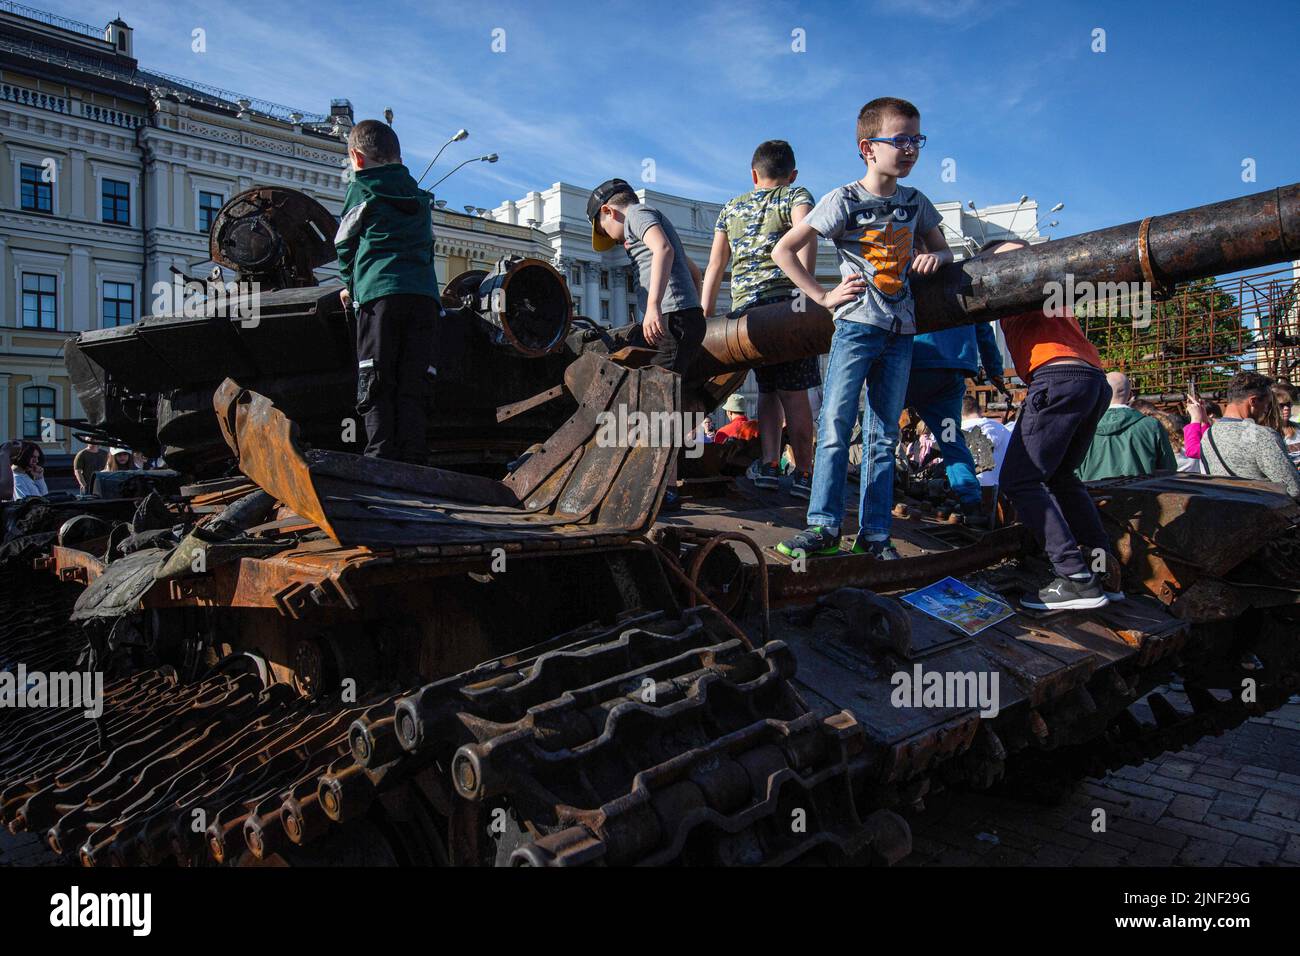 Children play on a destroyed Russian tank during an exhibition showing Russian military hardware destroyed during Russia's invasion of Ukraine in central Kyiv. On February 24, 2022, Russian troops entered Ukrainian territory, starting a conflict that provoked destruction and a humanitarian crisis. Stock Photo